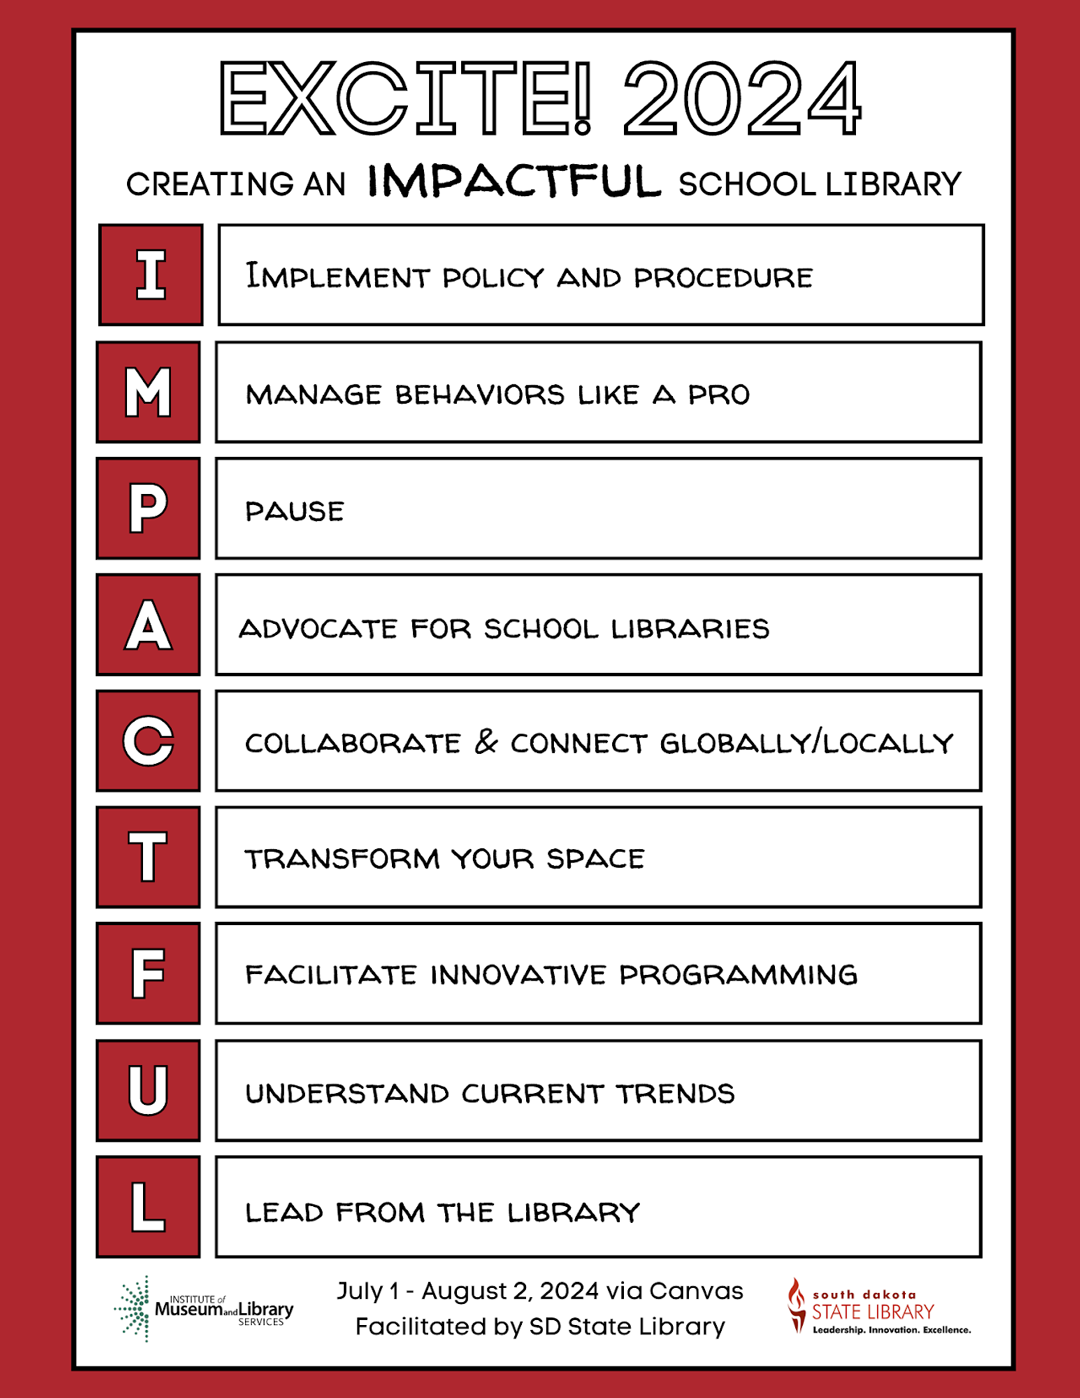 excite 2024 creating an impactful school library